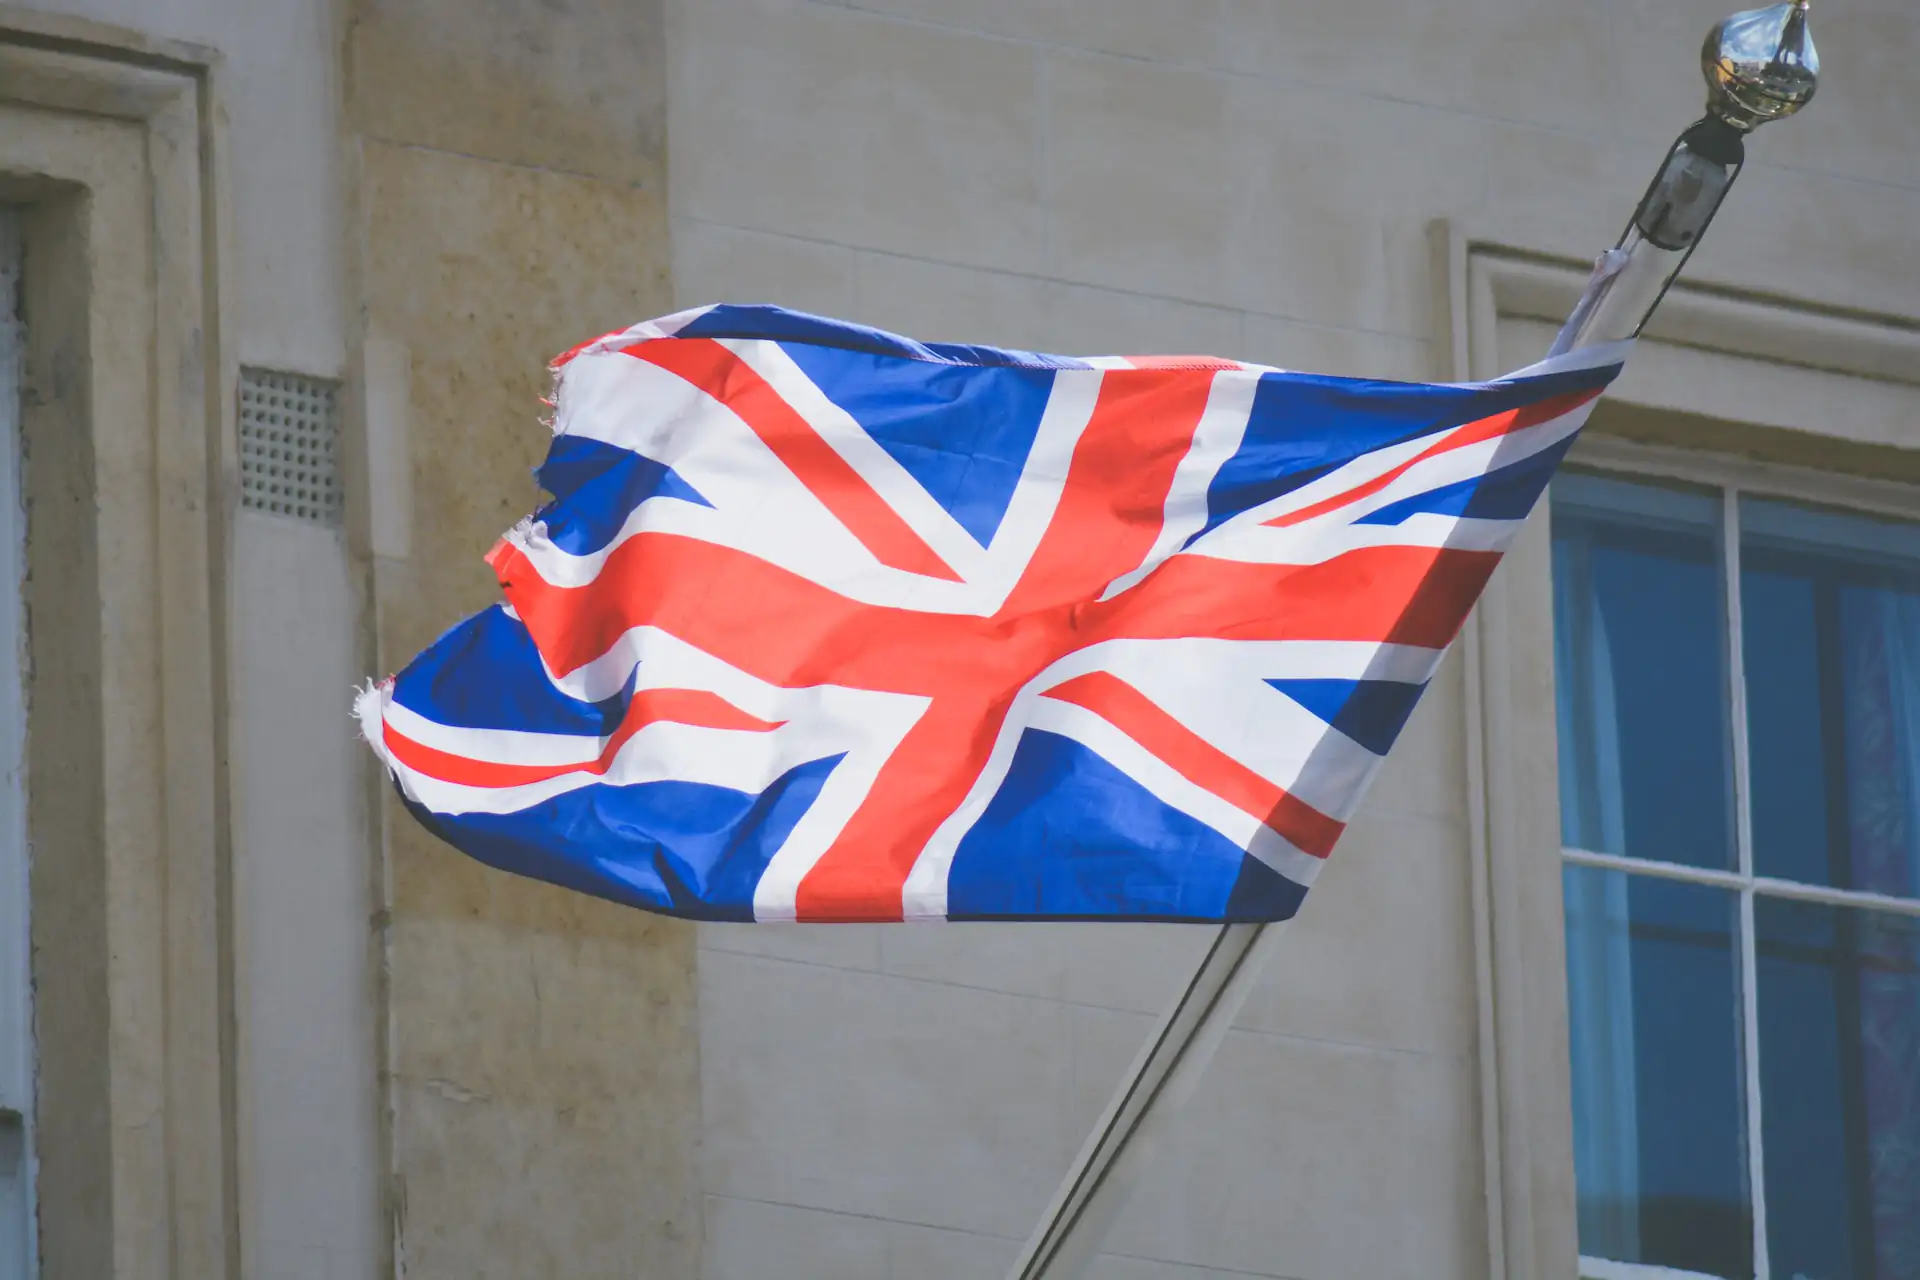 United Kingdom Treasury To Consider Launching GBP Stablecoin